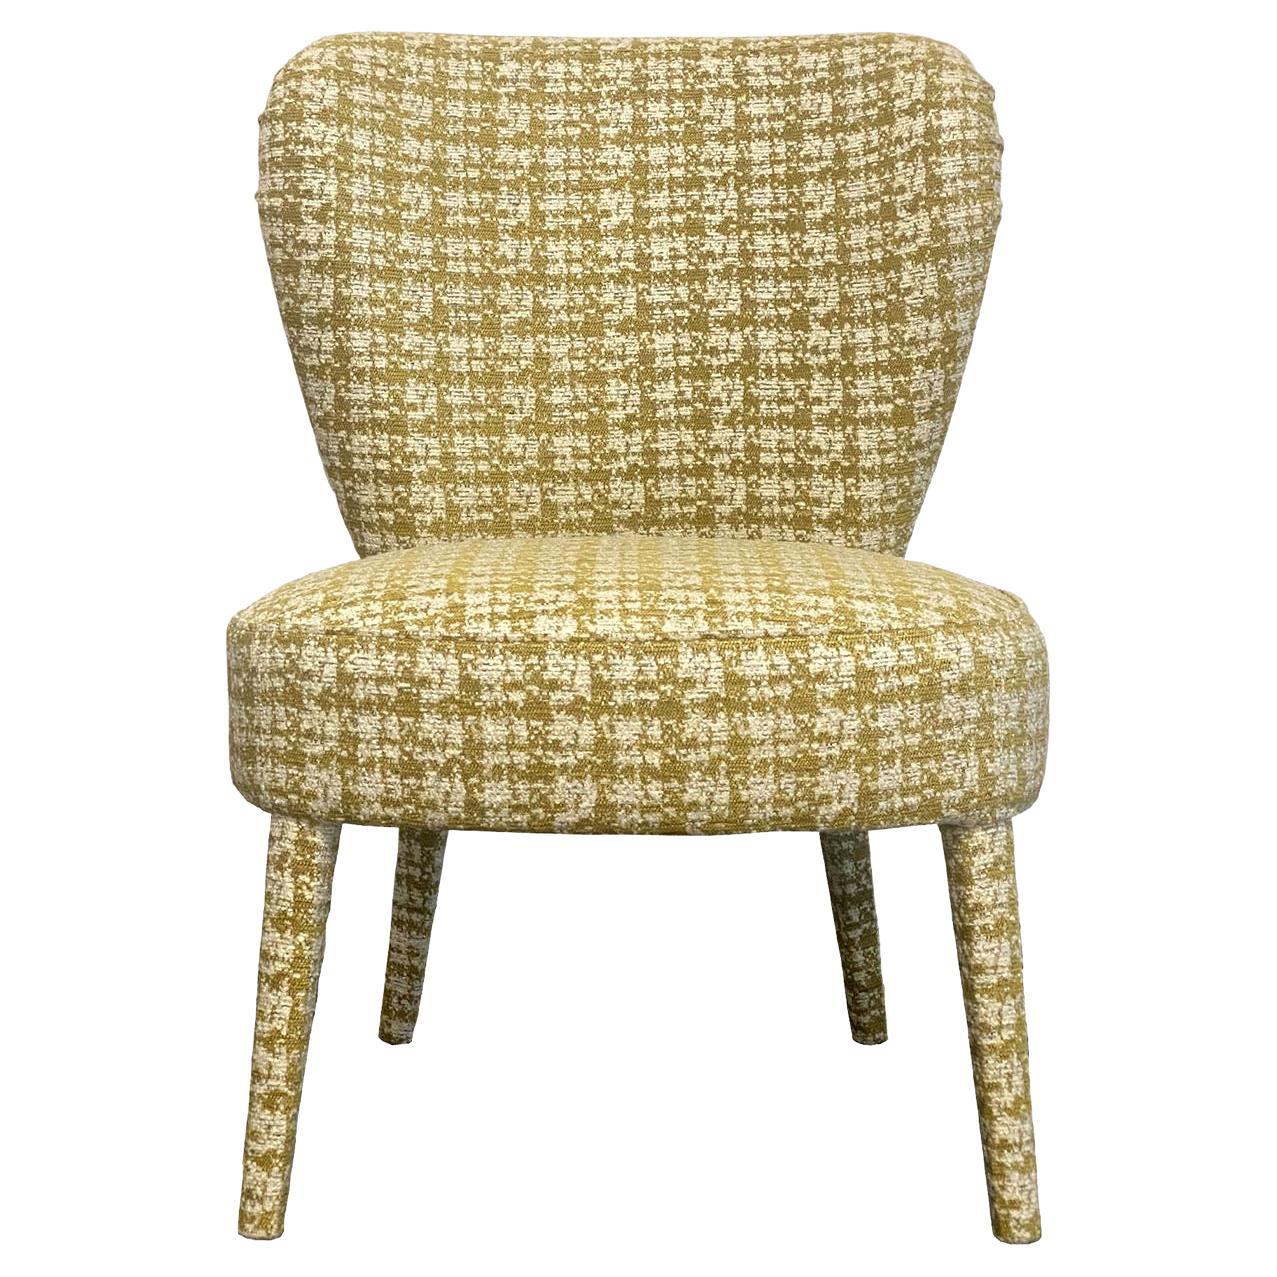 Cloe' Pattern Upholstered Lounge Chair